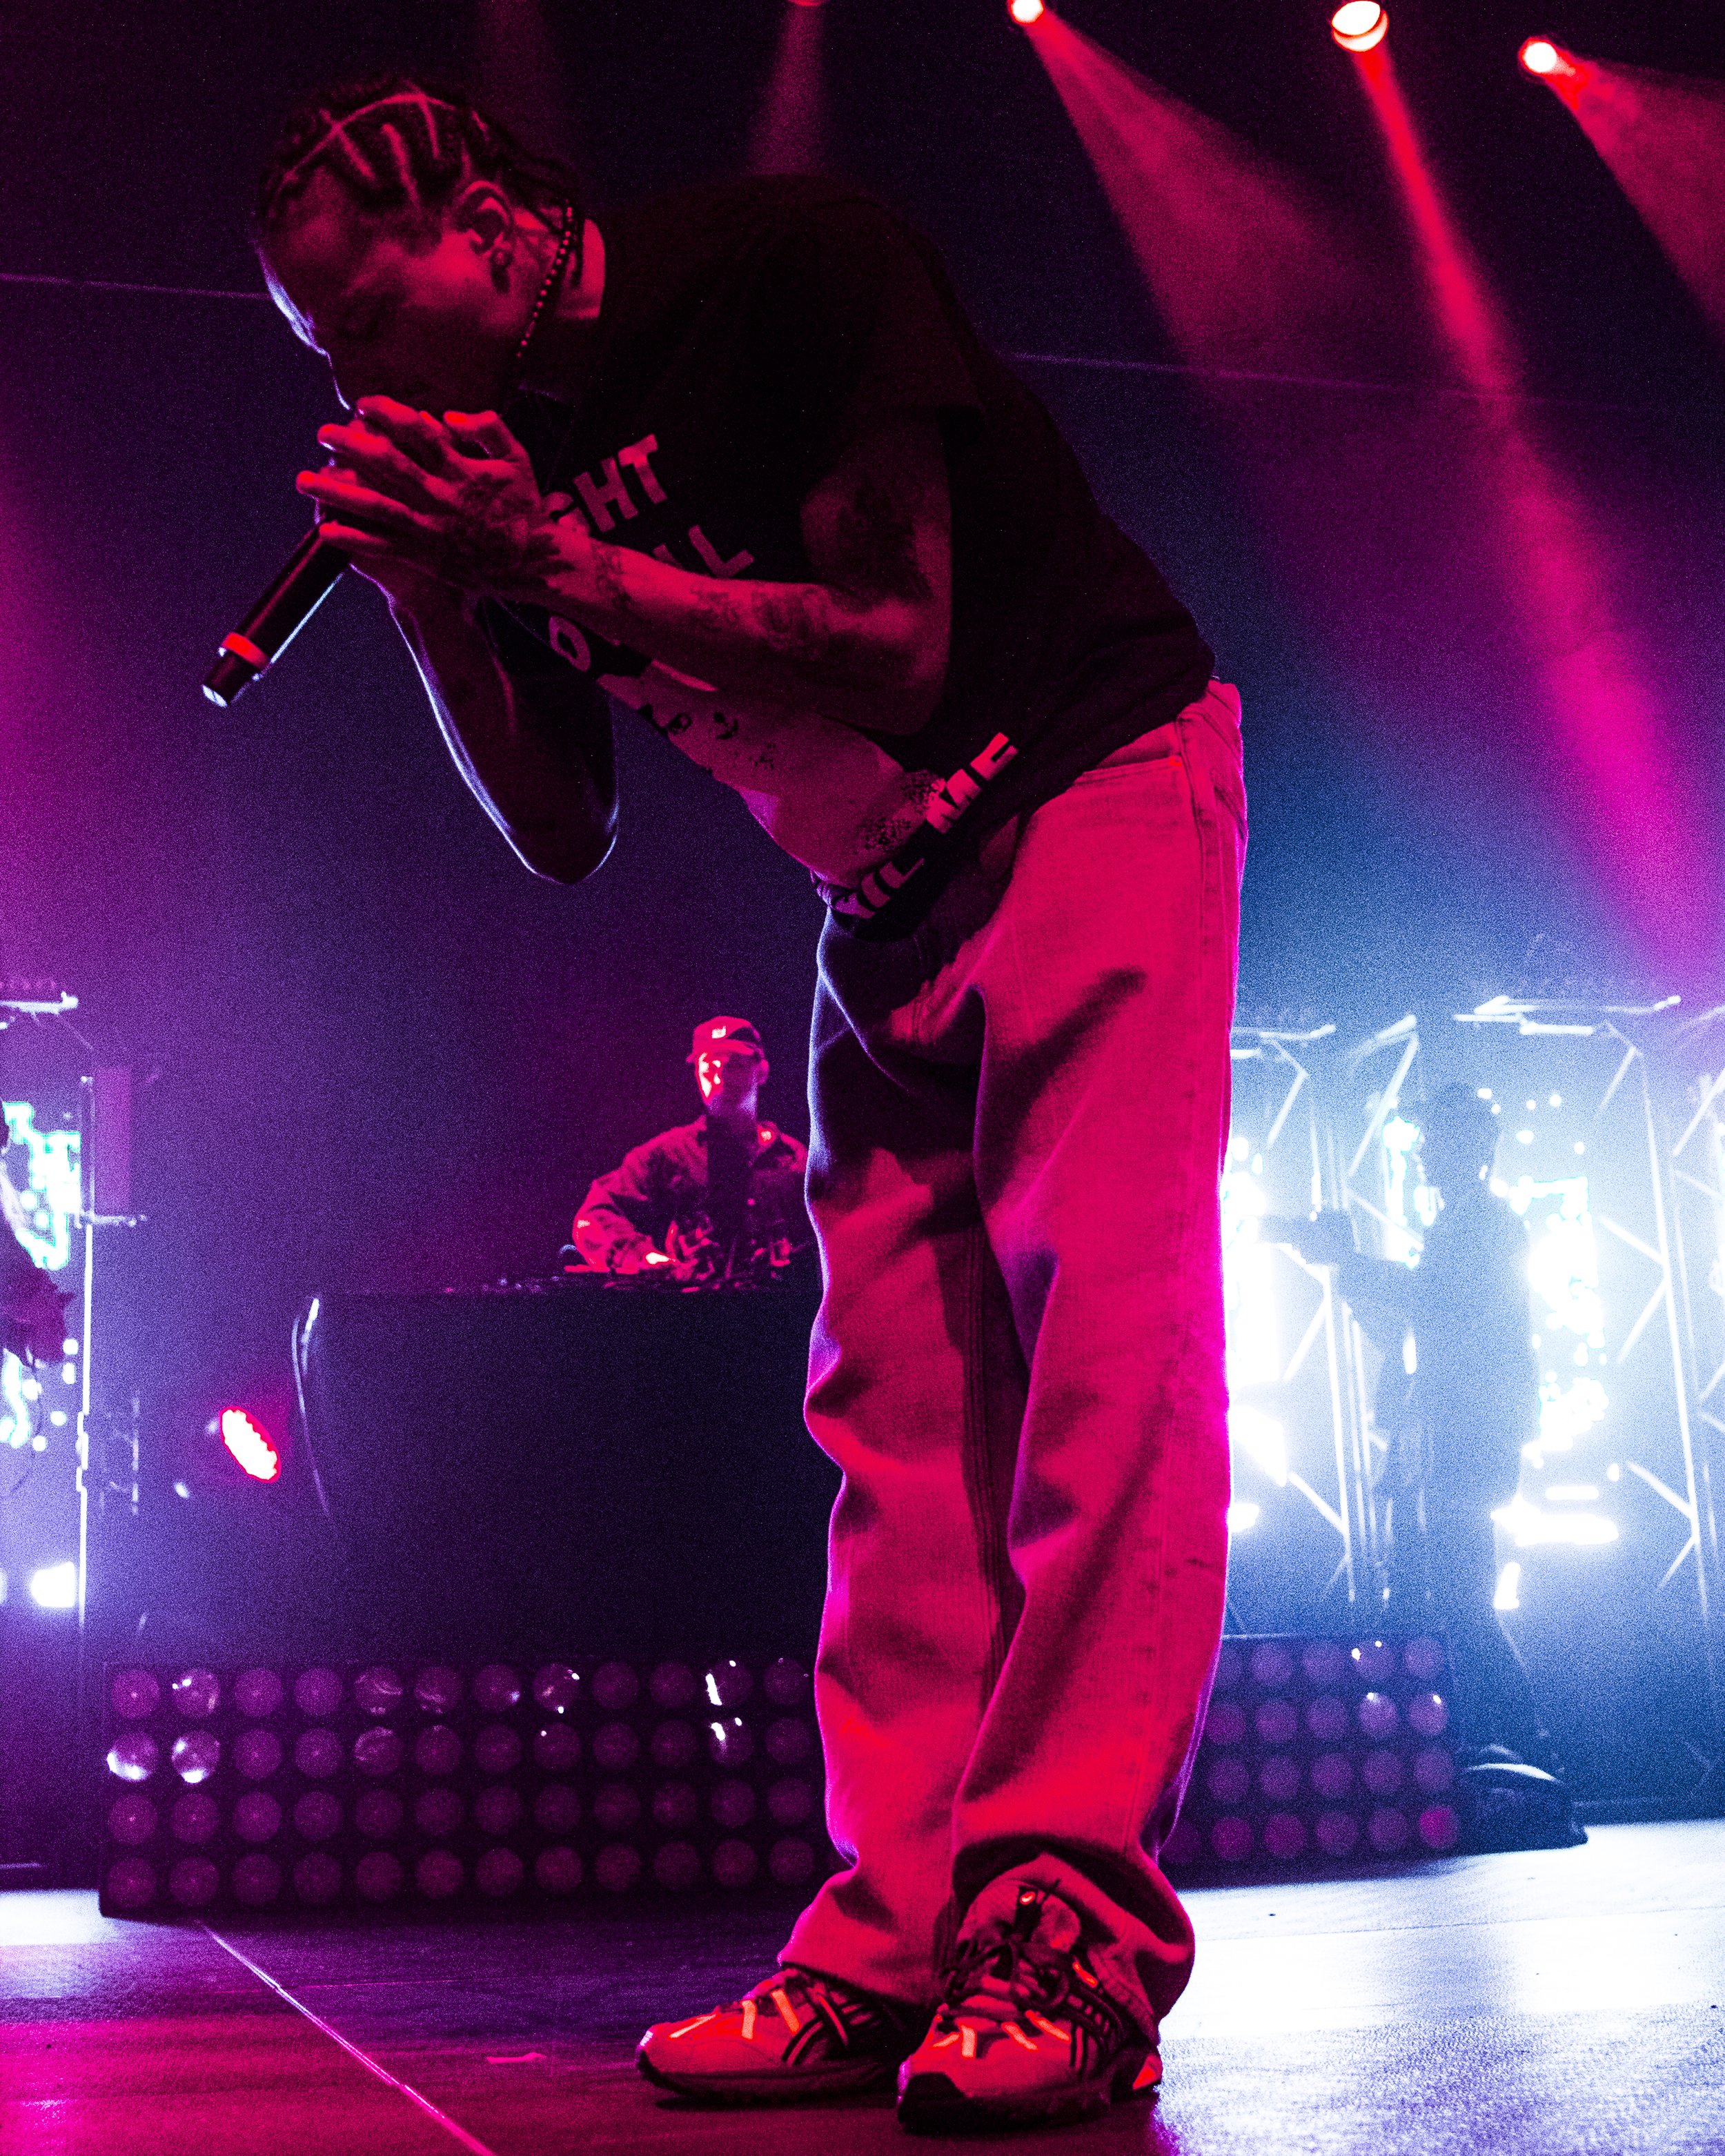 $not, Night Lovell, Eem Triplin, Dc The Don -  GET BUSY OR DIE NORTH AMERICAN TOUR 2023 - Fillmore Auditorium - Denver, Colorado - Monday, May 29, 2023 - PHOTO BY Mowgli Miles of Interracial Friends-20.JPG